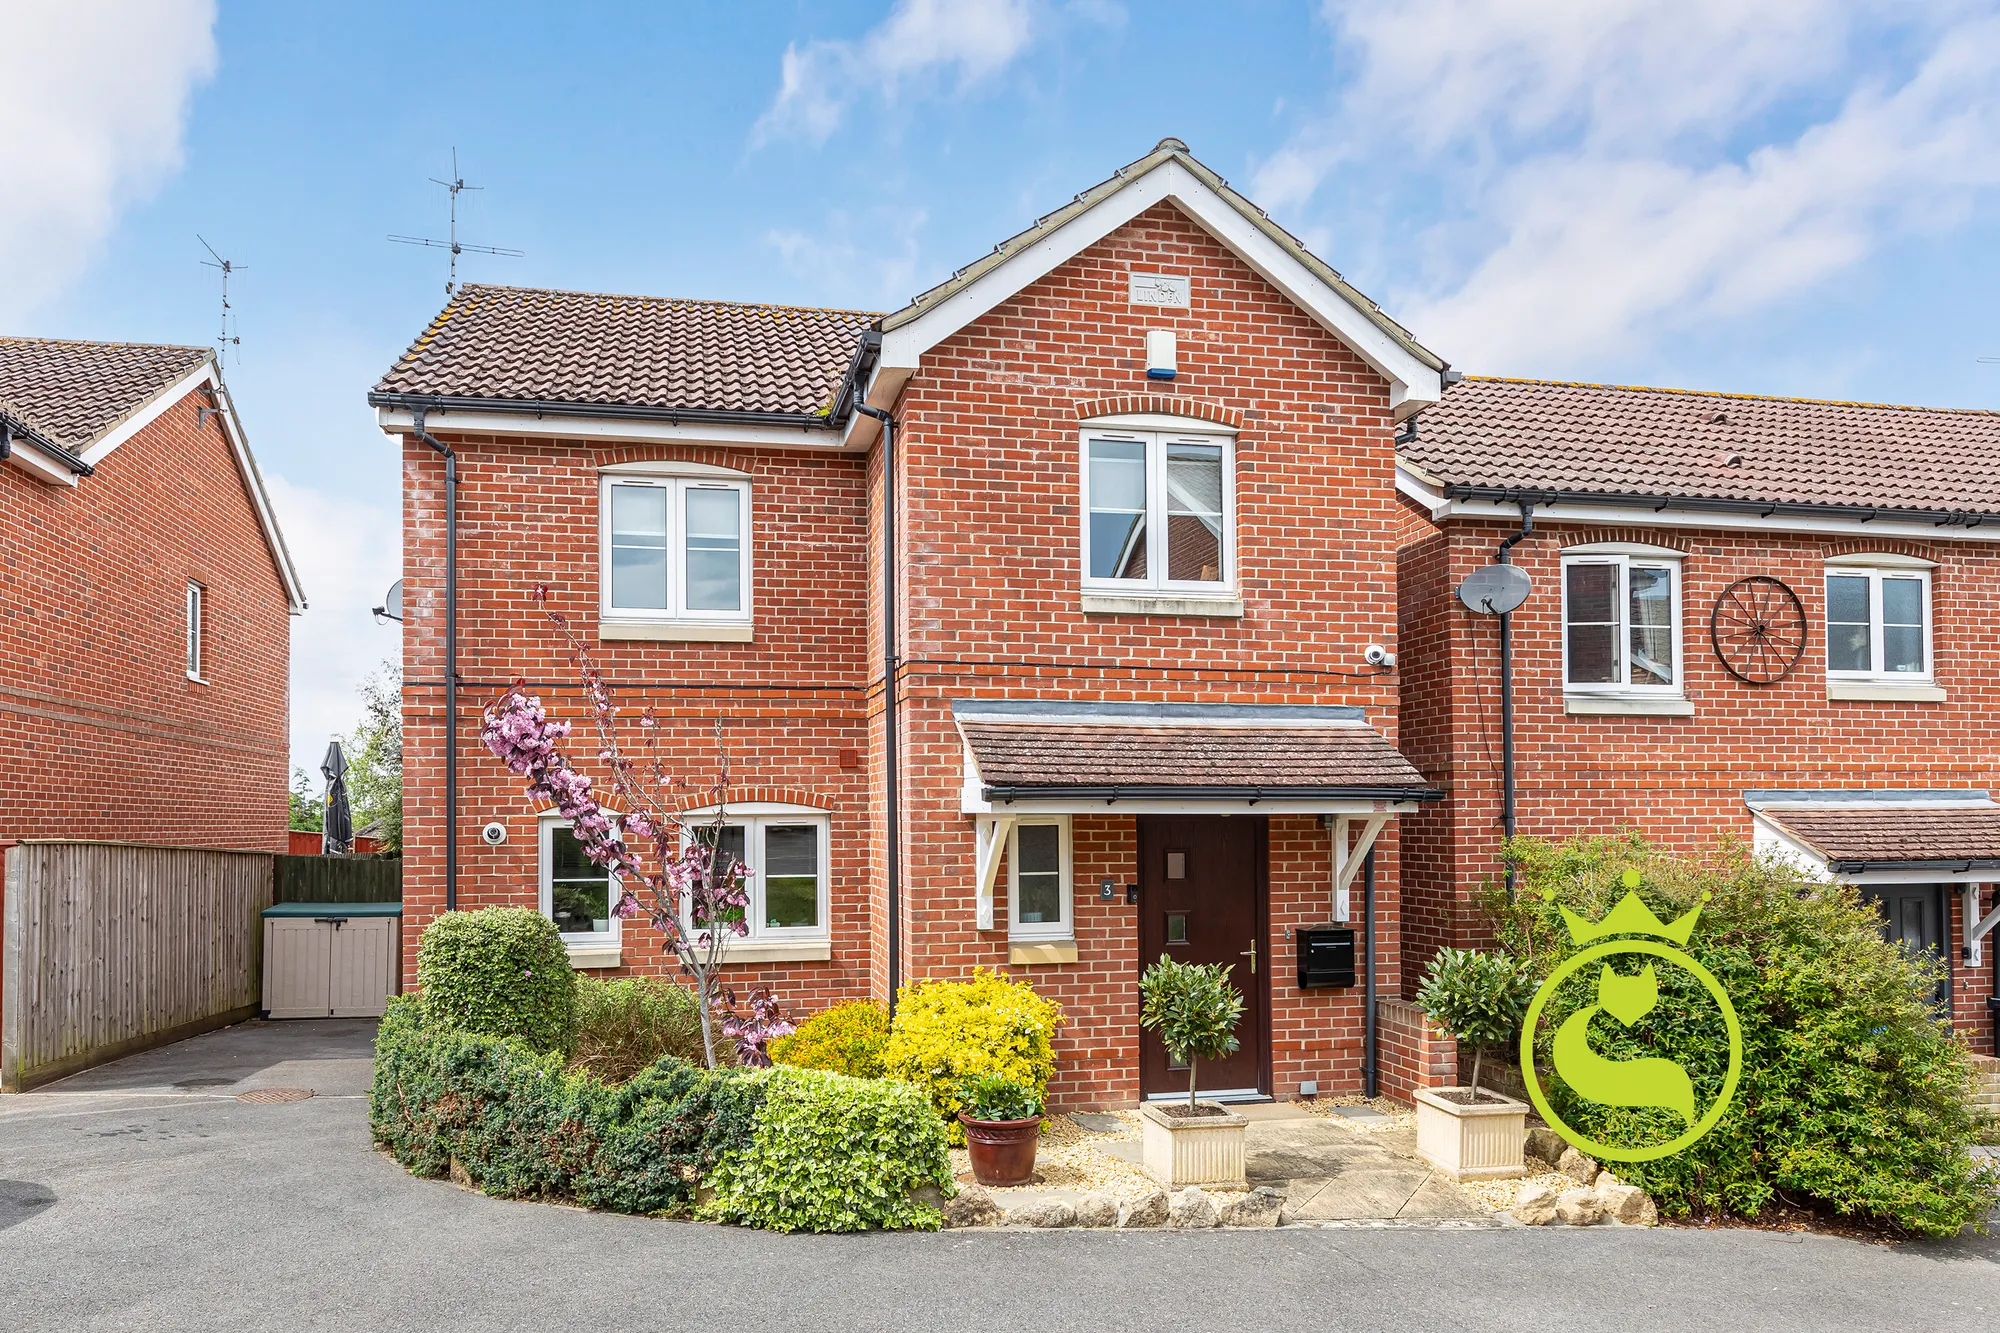 3 bed detached house for sale in Wellow Gardens, Poole - Property Image 1